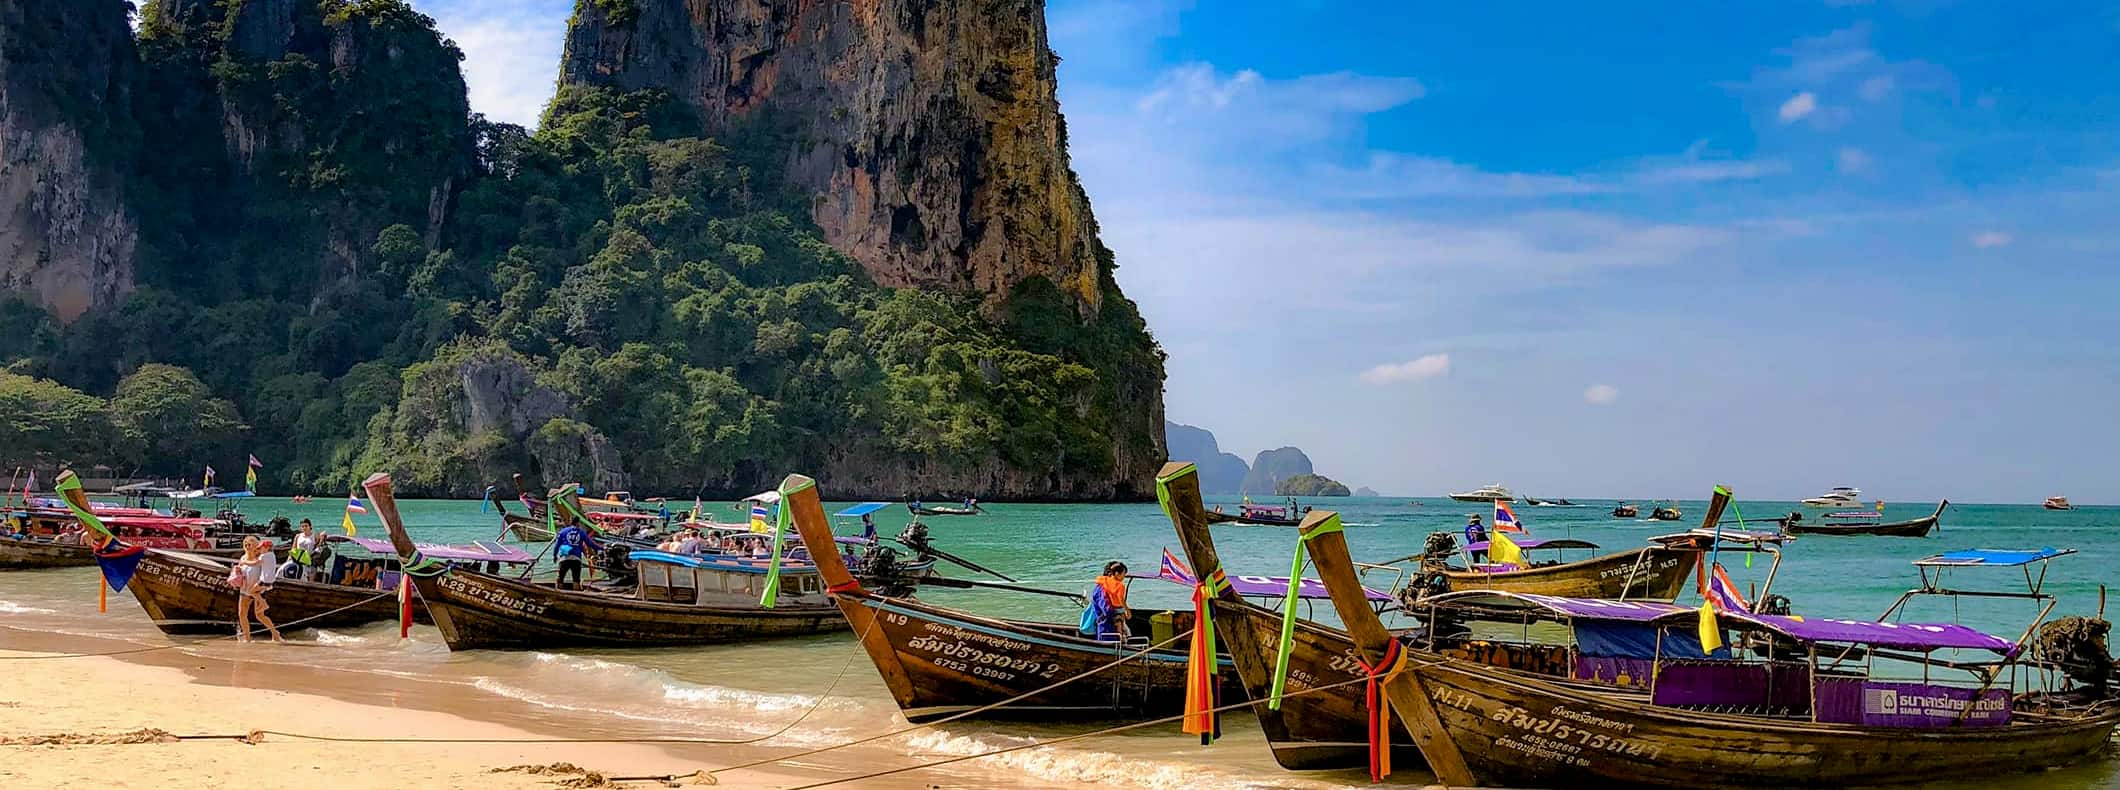 A row of longtail boats parked on a stunning beach in Thailand